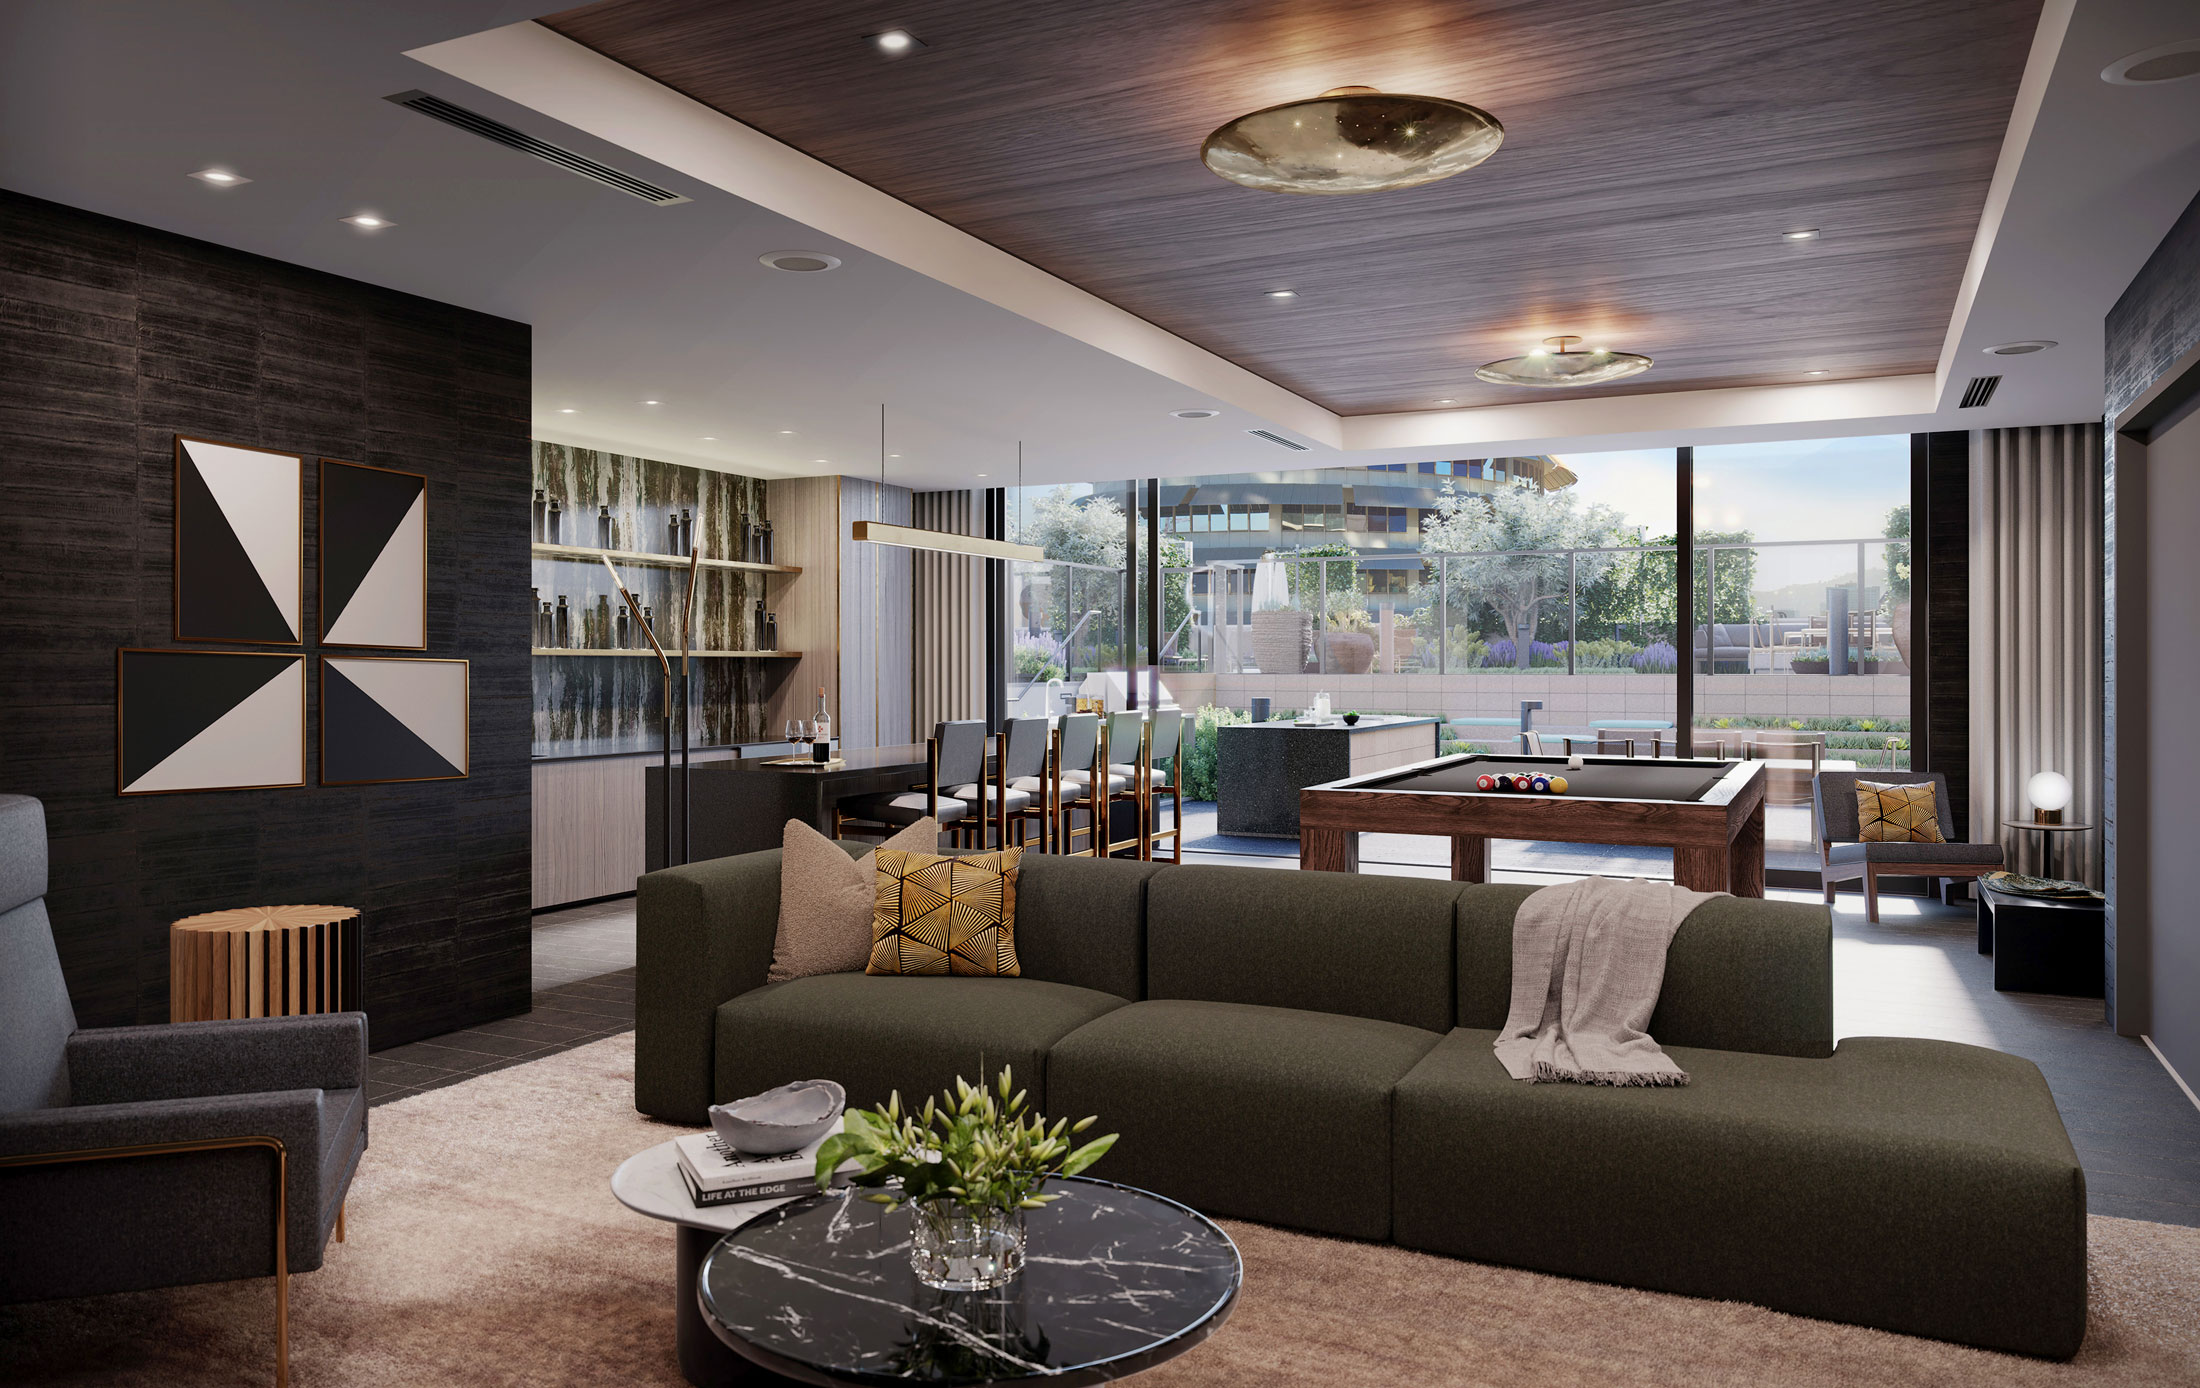 Architectural Rendering of the interior of the Argyle House project located in Hollywood, California